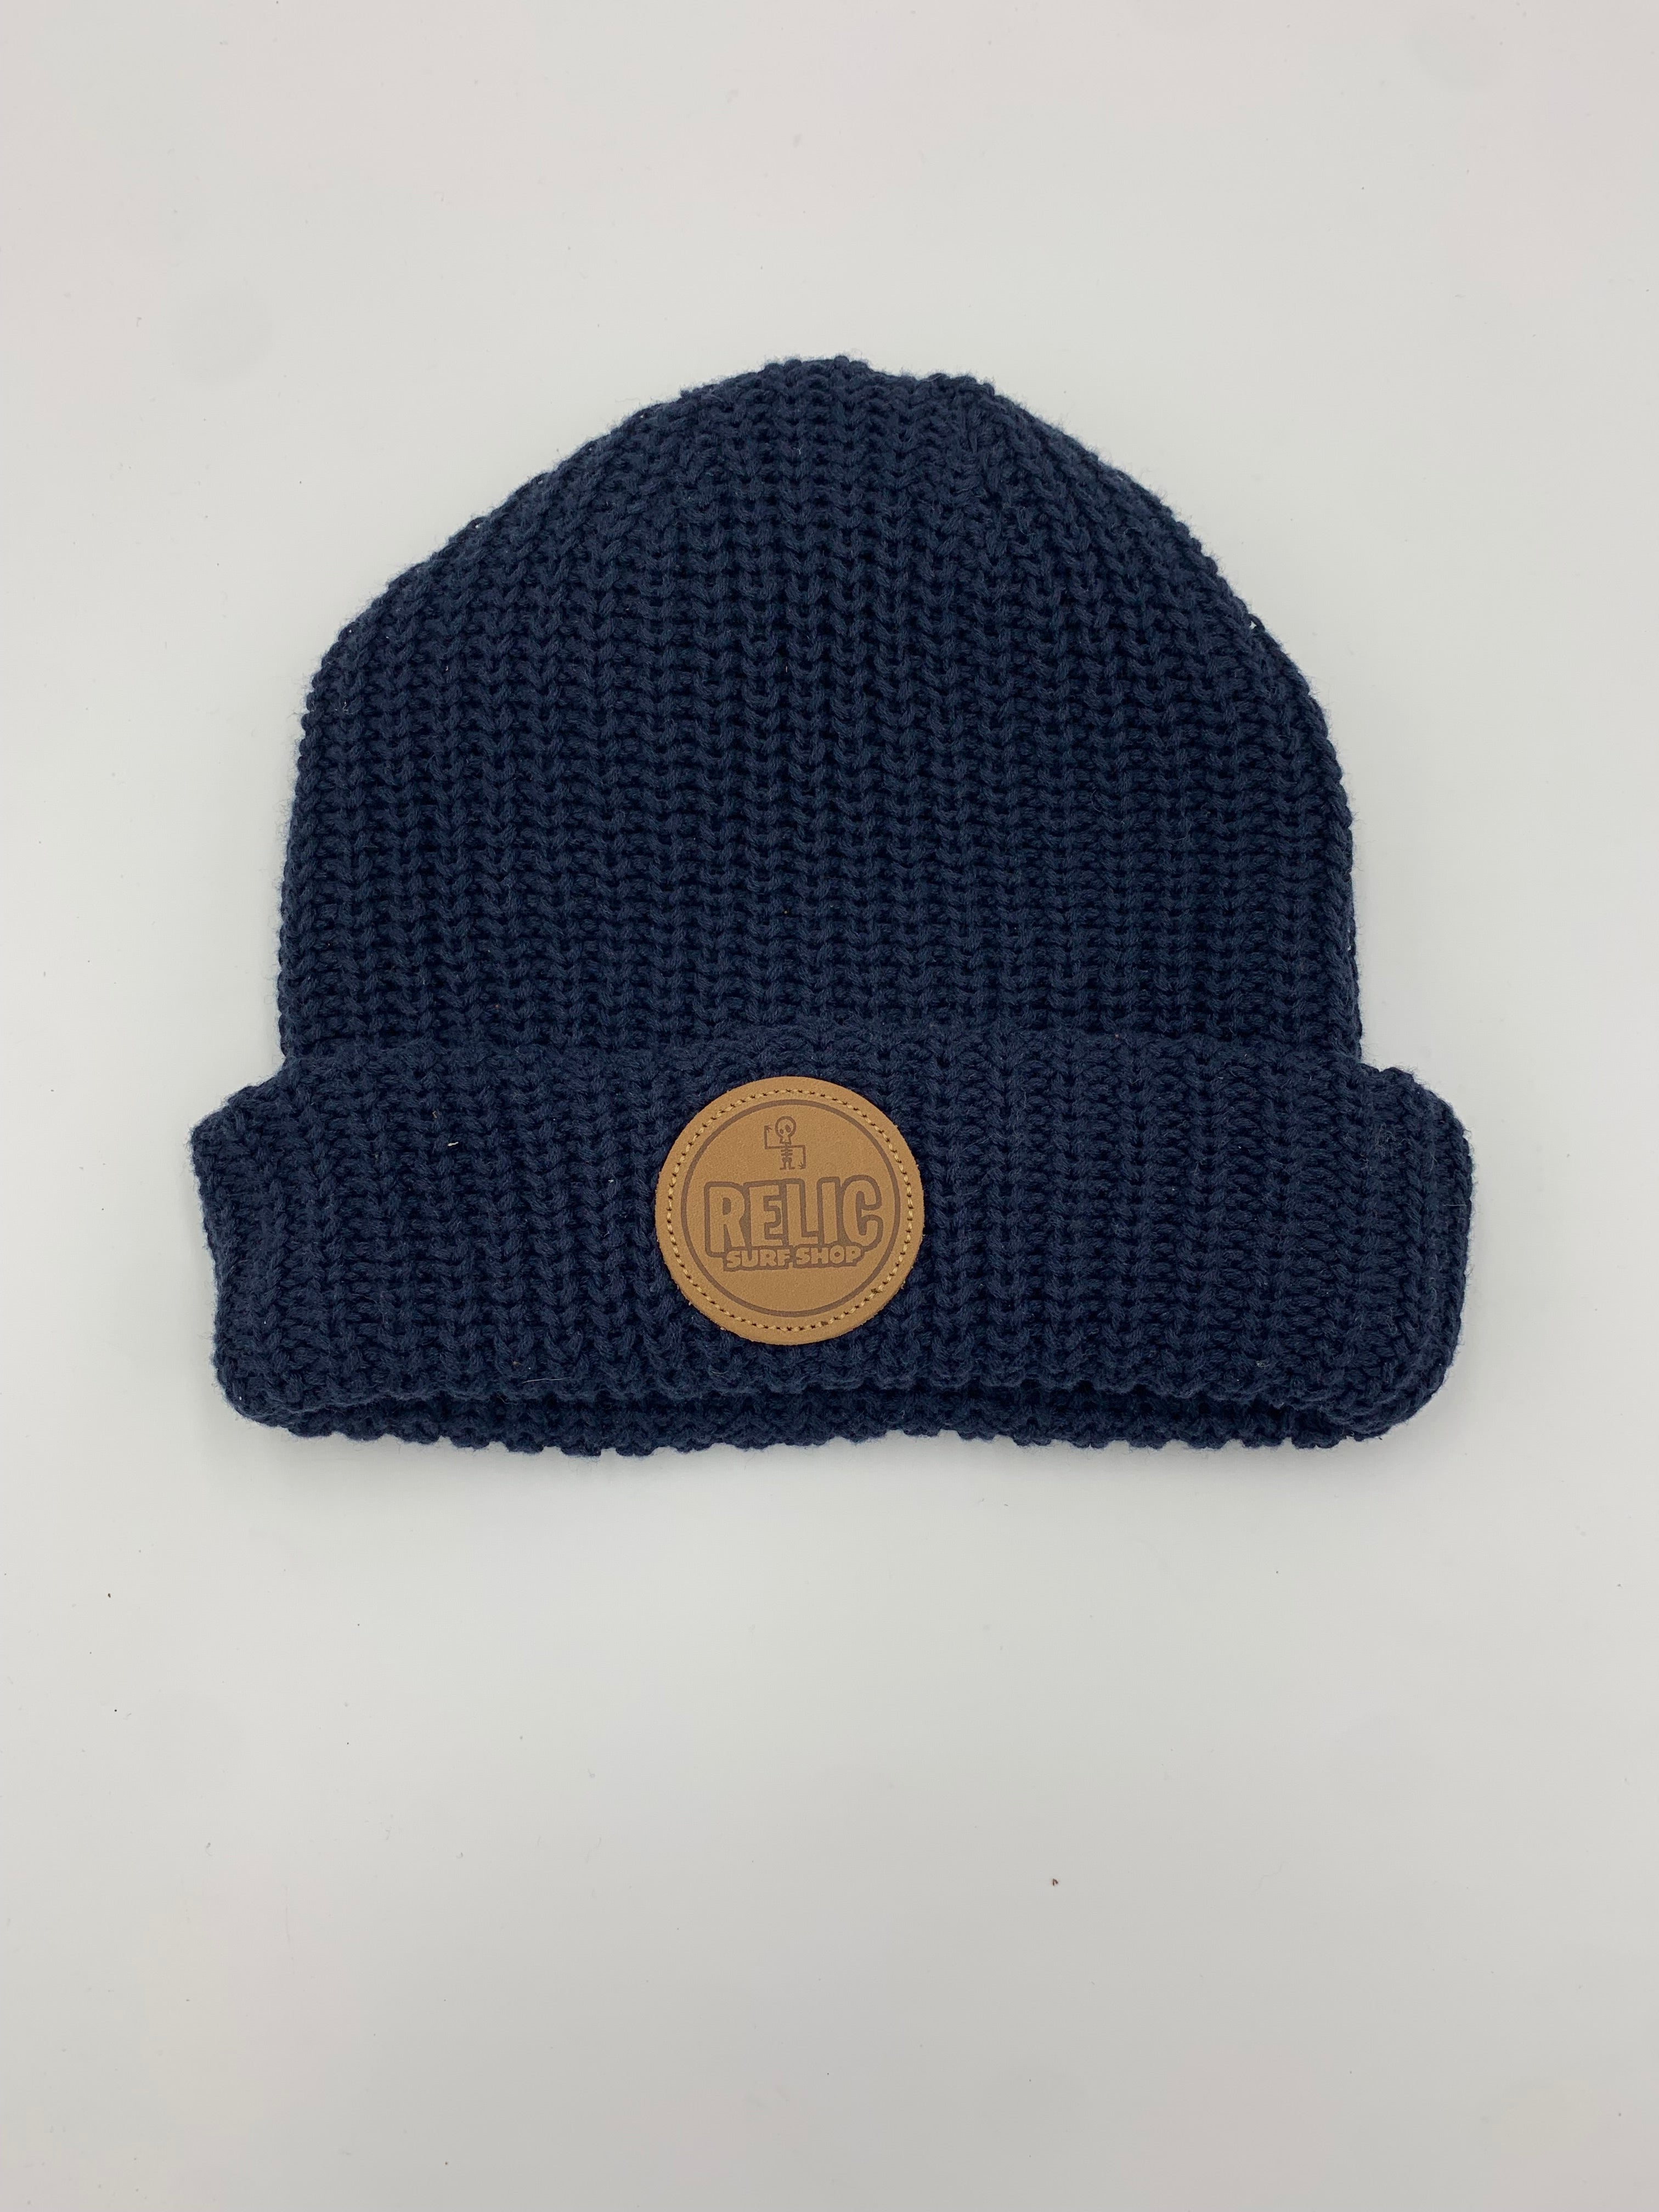 Relic Skele Beanie Chunky knit